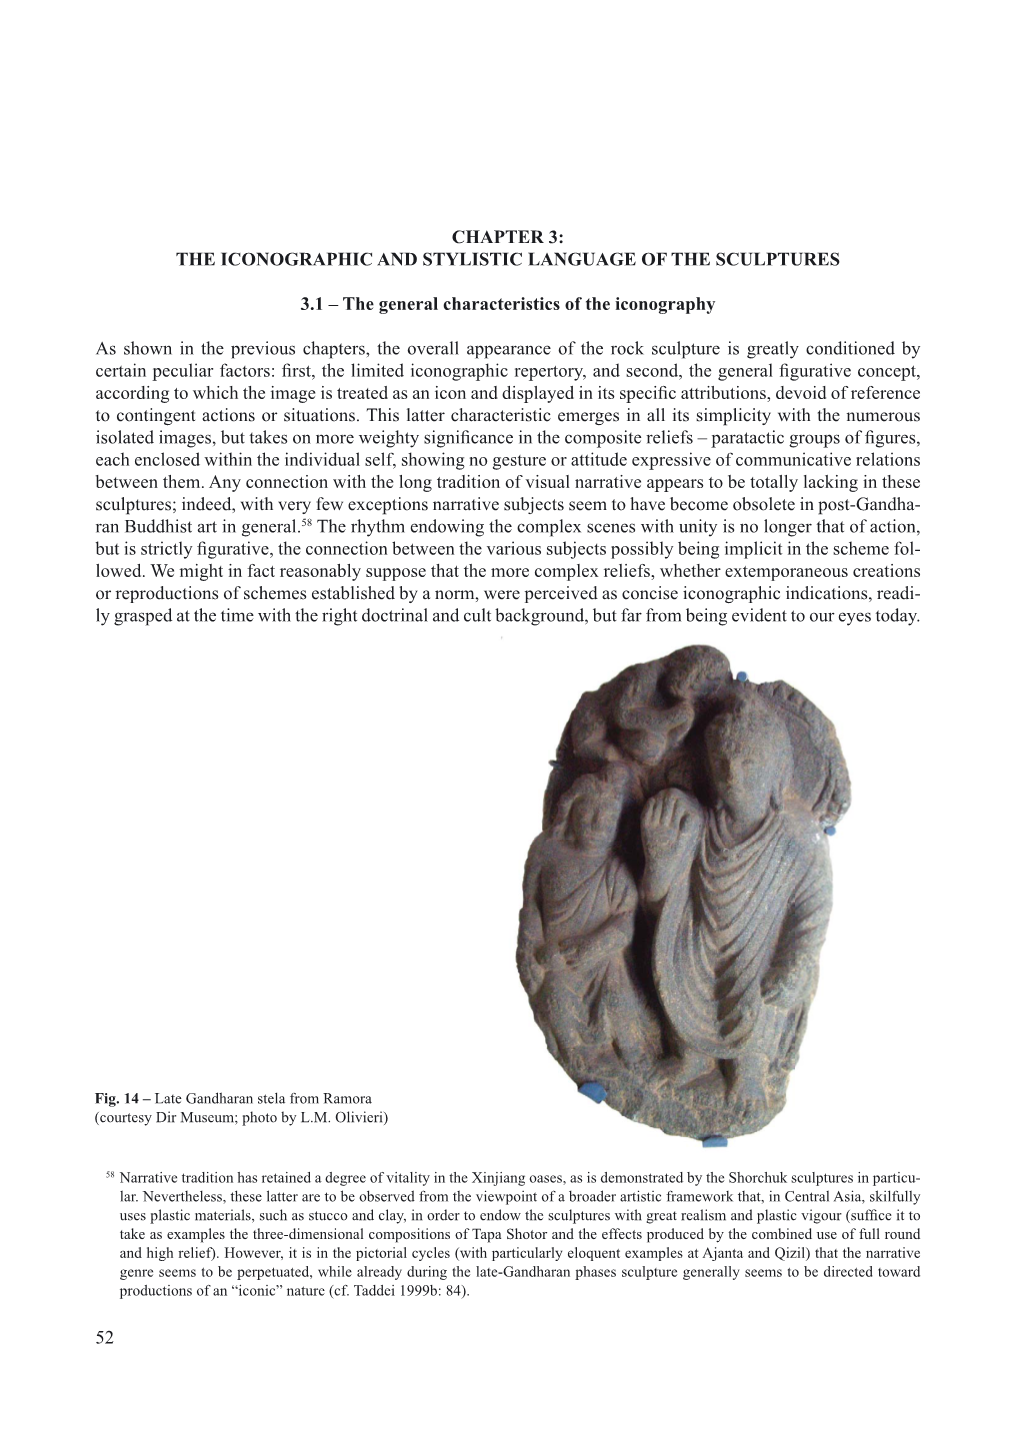 The Iconographic and Stylistic Language of the Sculptures